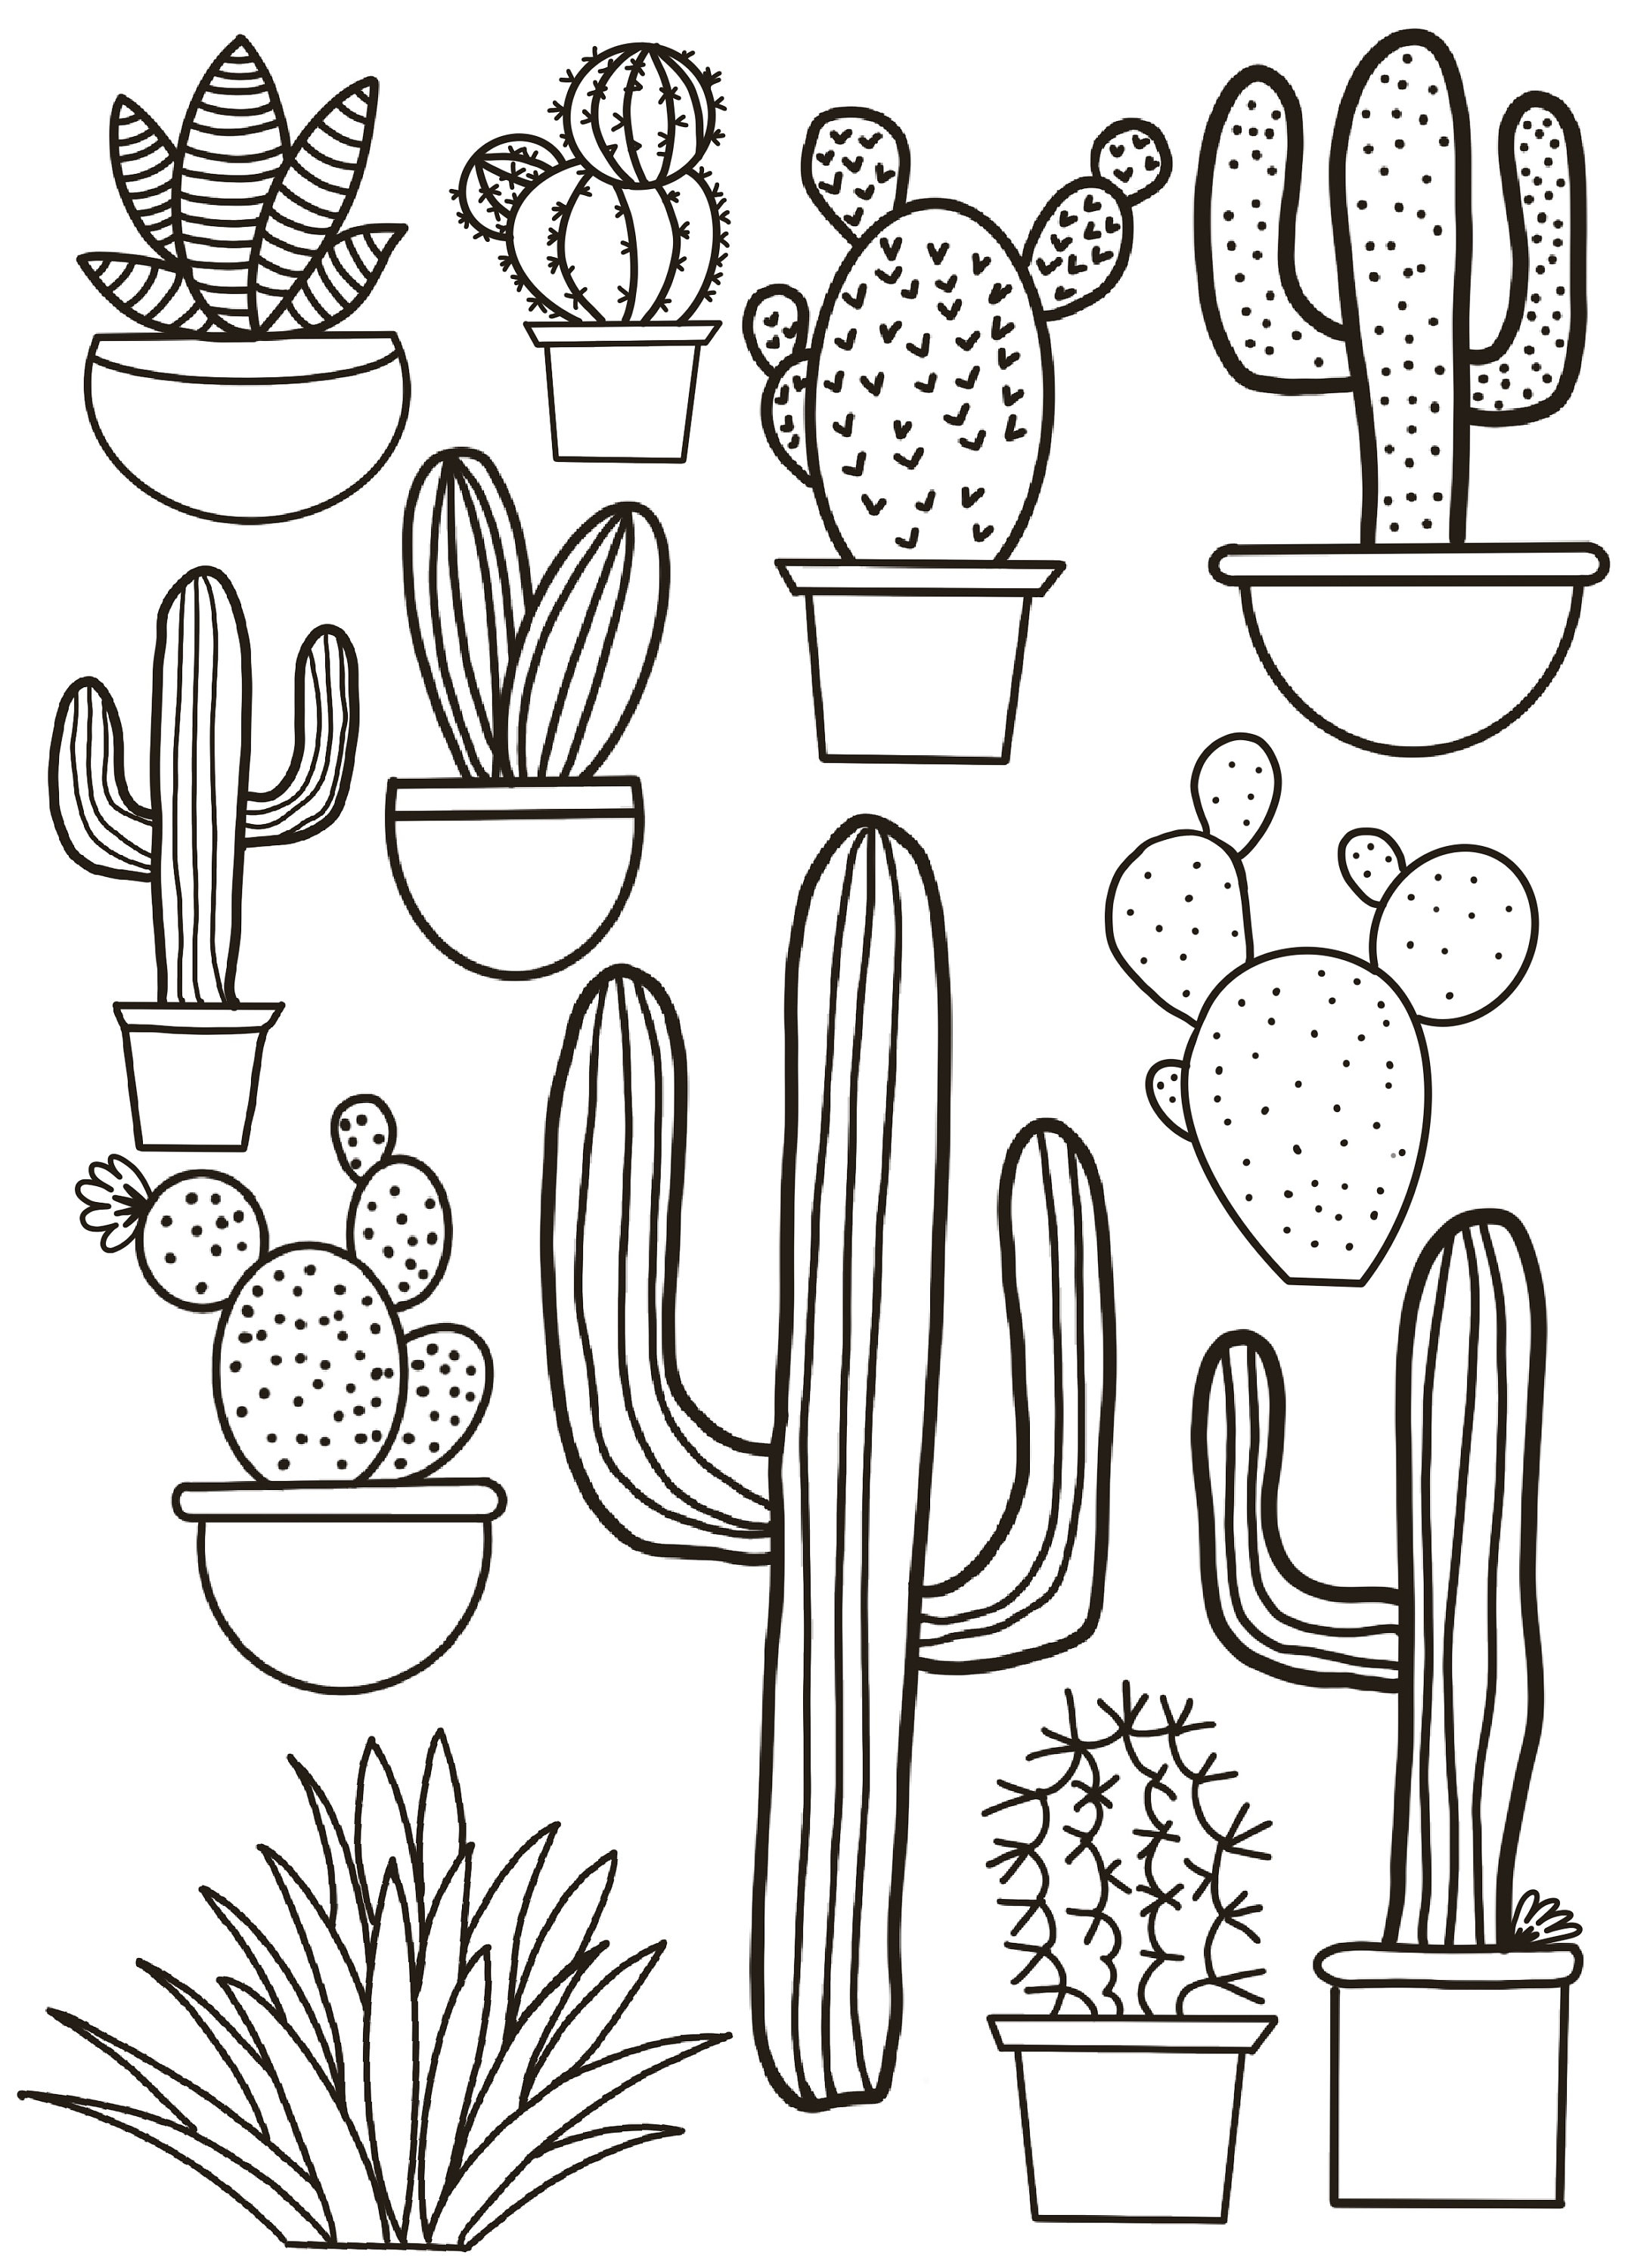 Cactus Coloring Page - Etsy